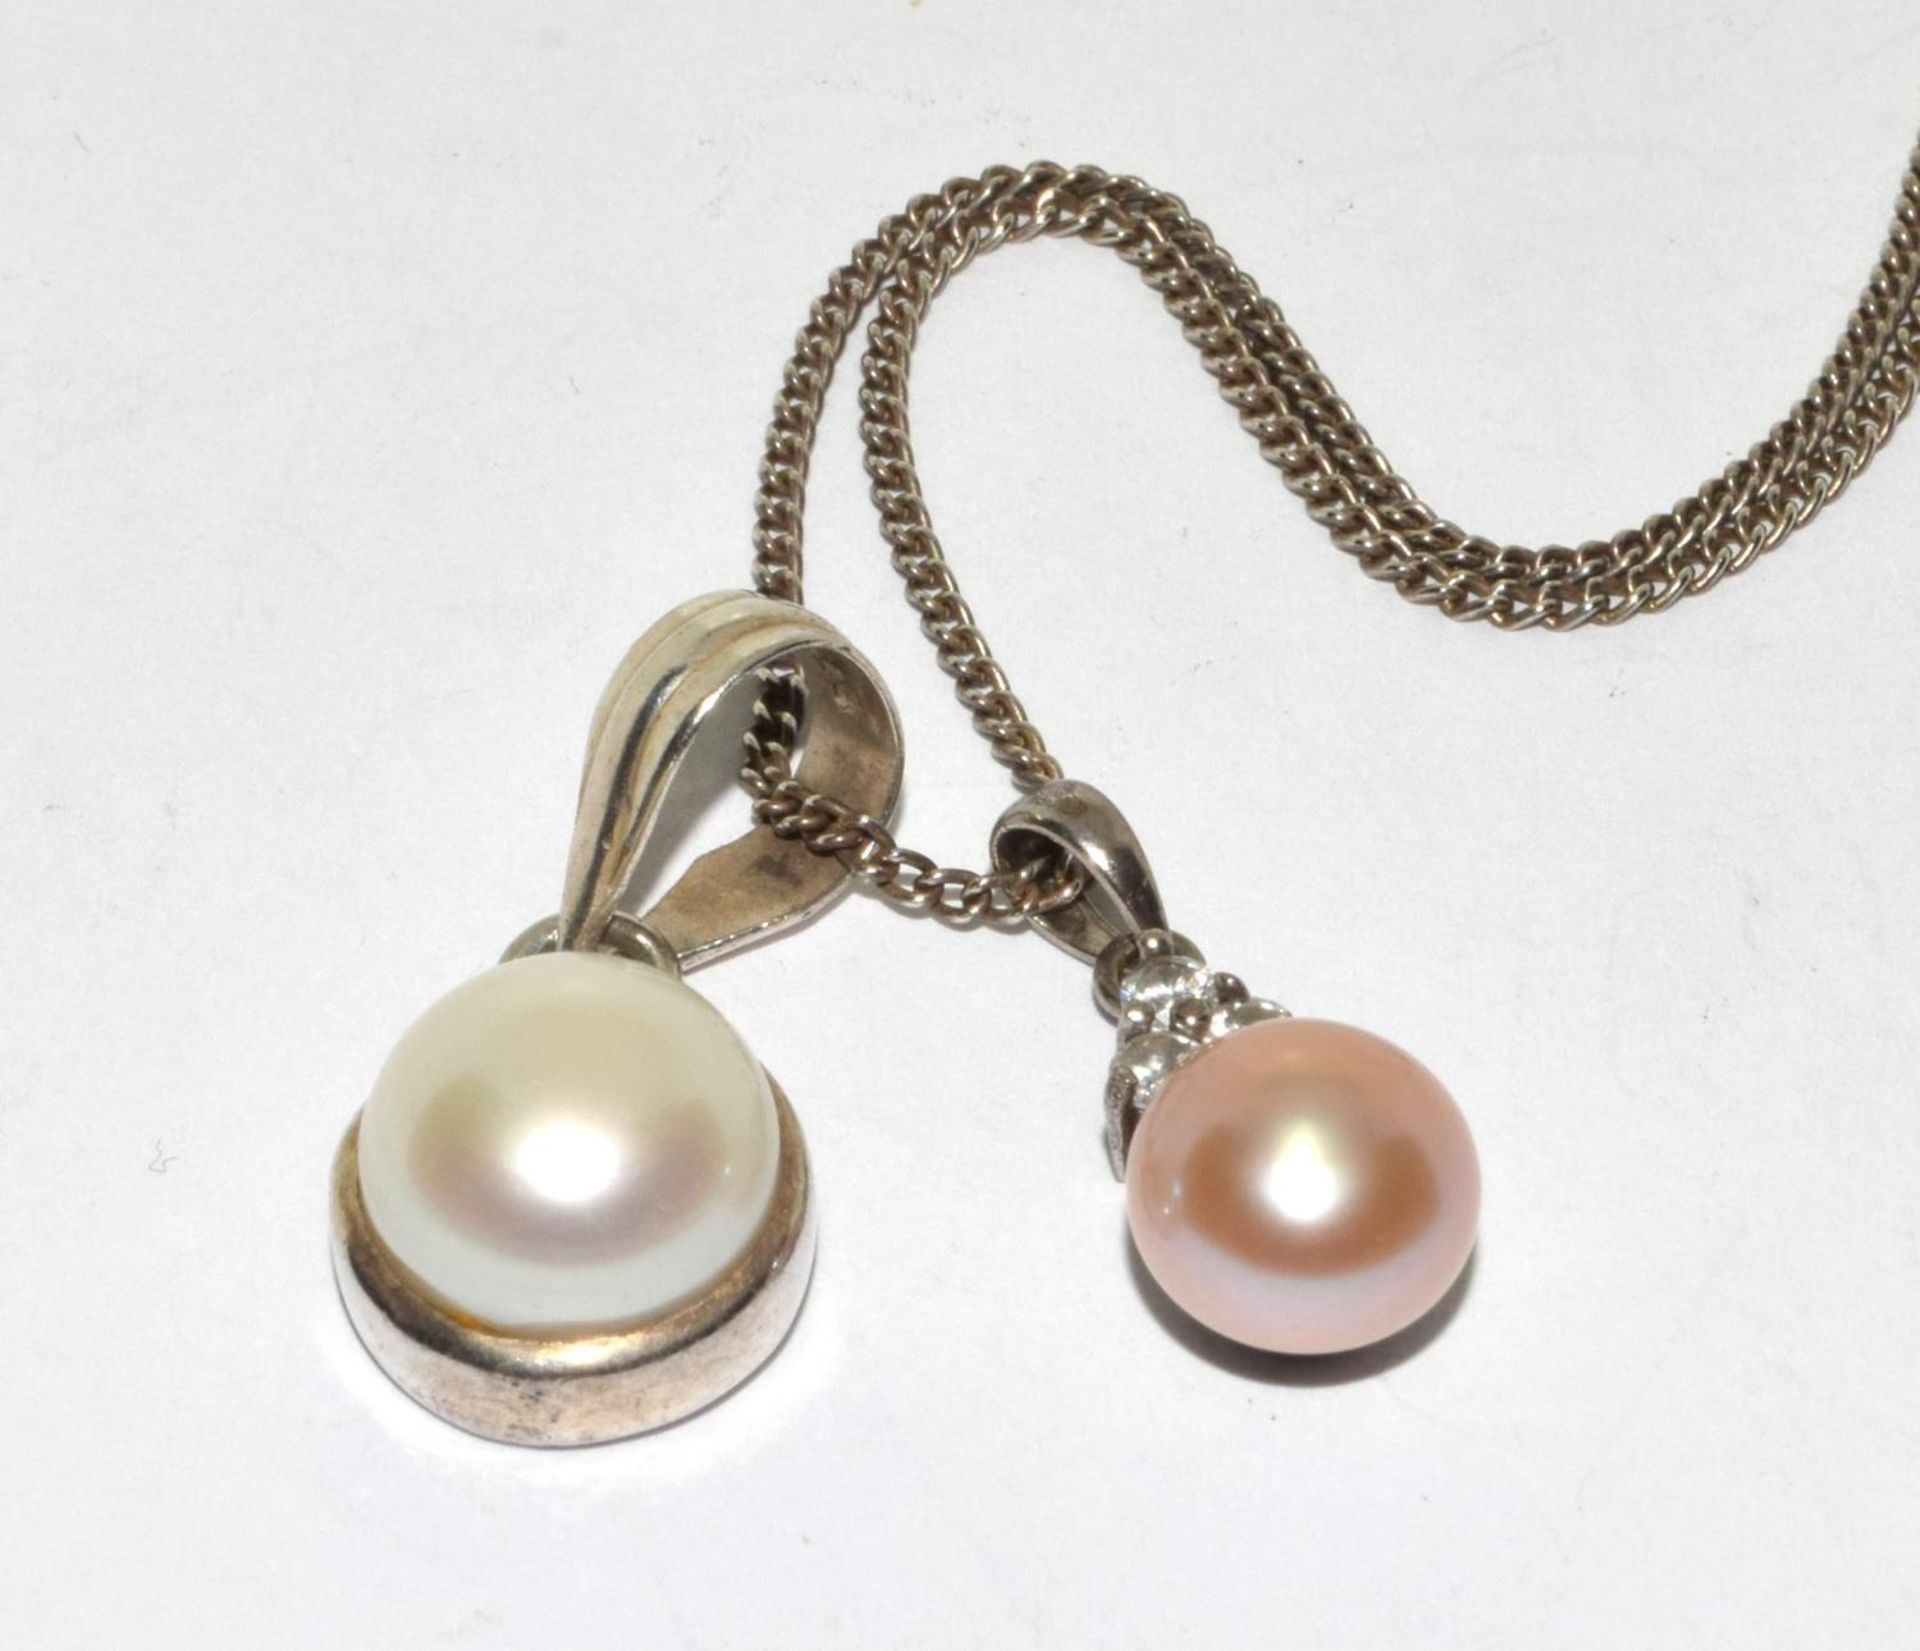 2 x 925 silver cultured pearl pendants and earrings - Image 3 of 4